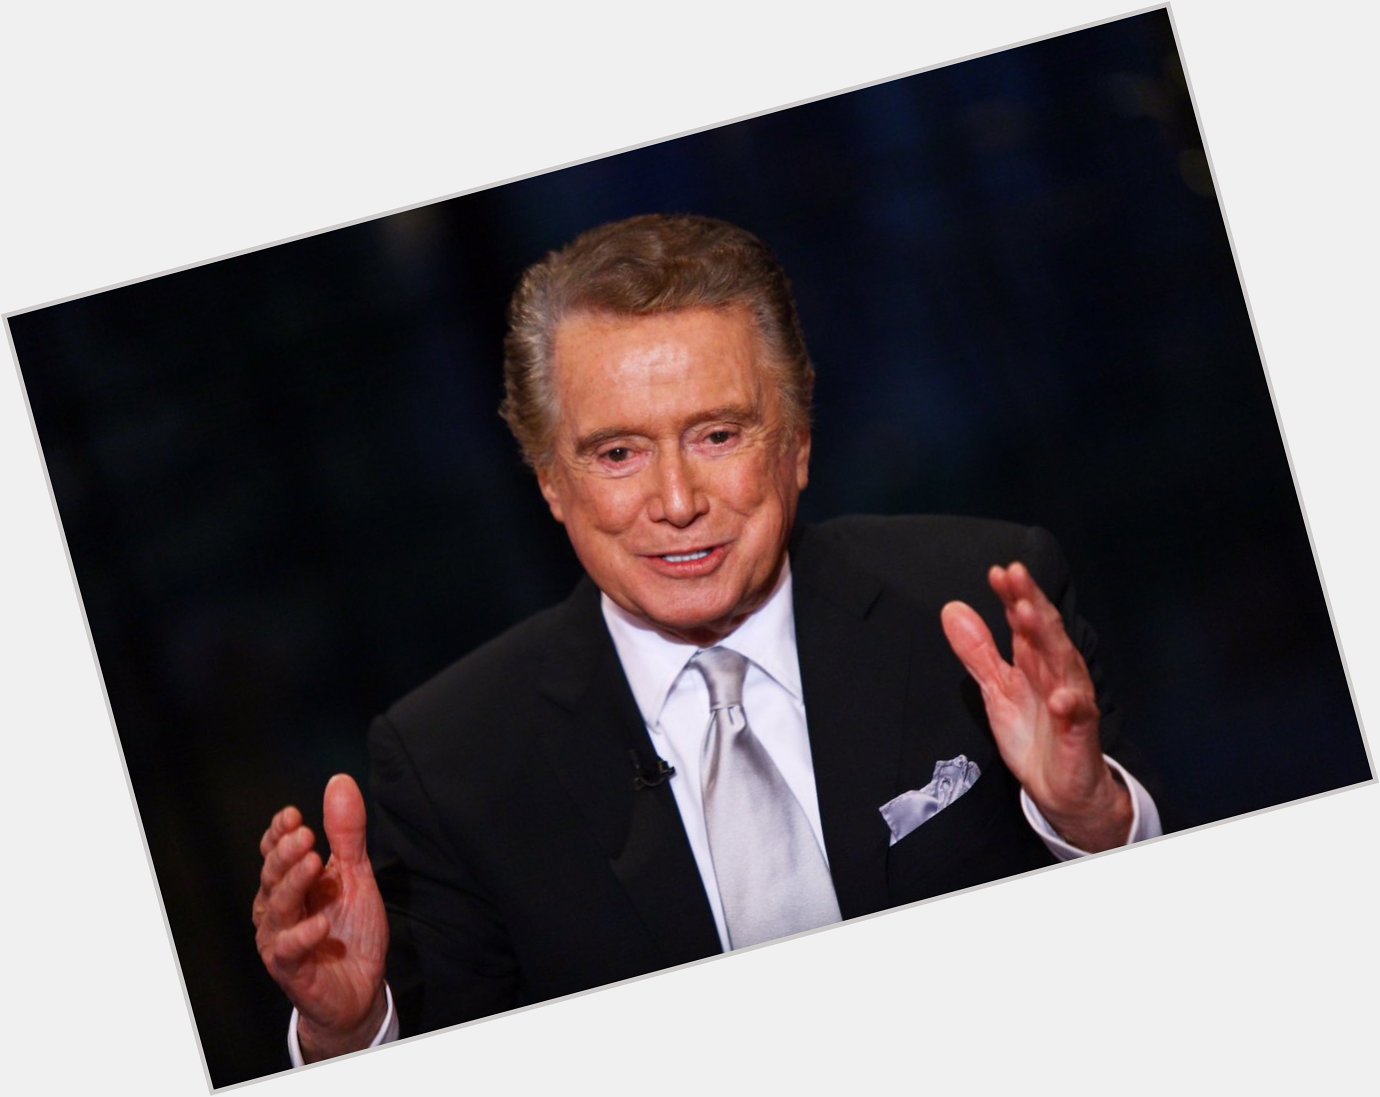 Happy Birthday to our favorite TV smile Regis Philbin turning 86 today - August 25, 1931  